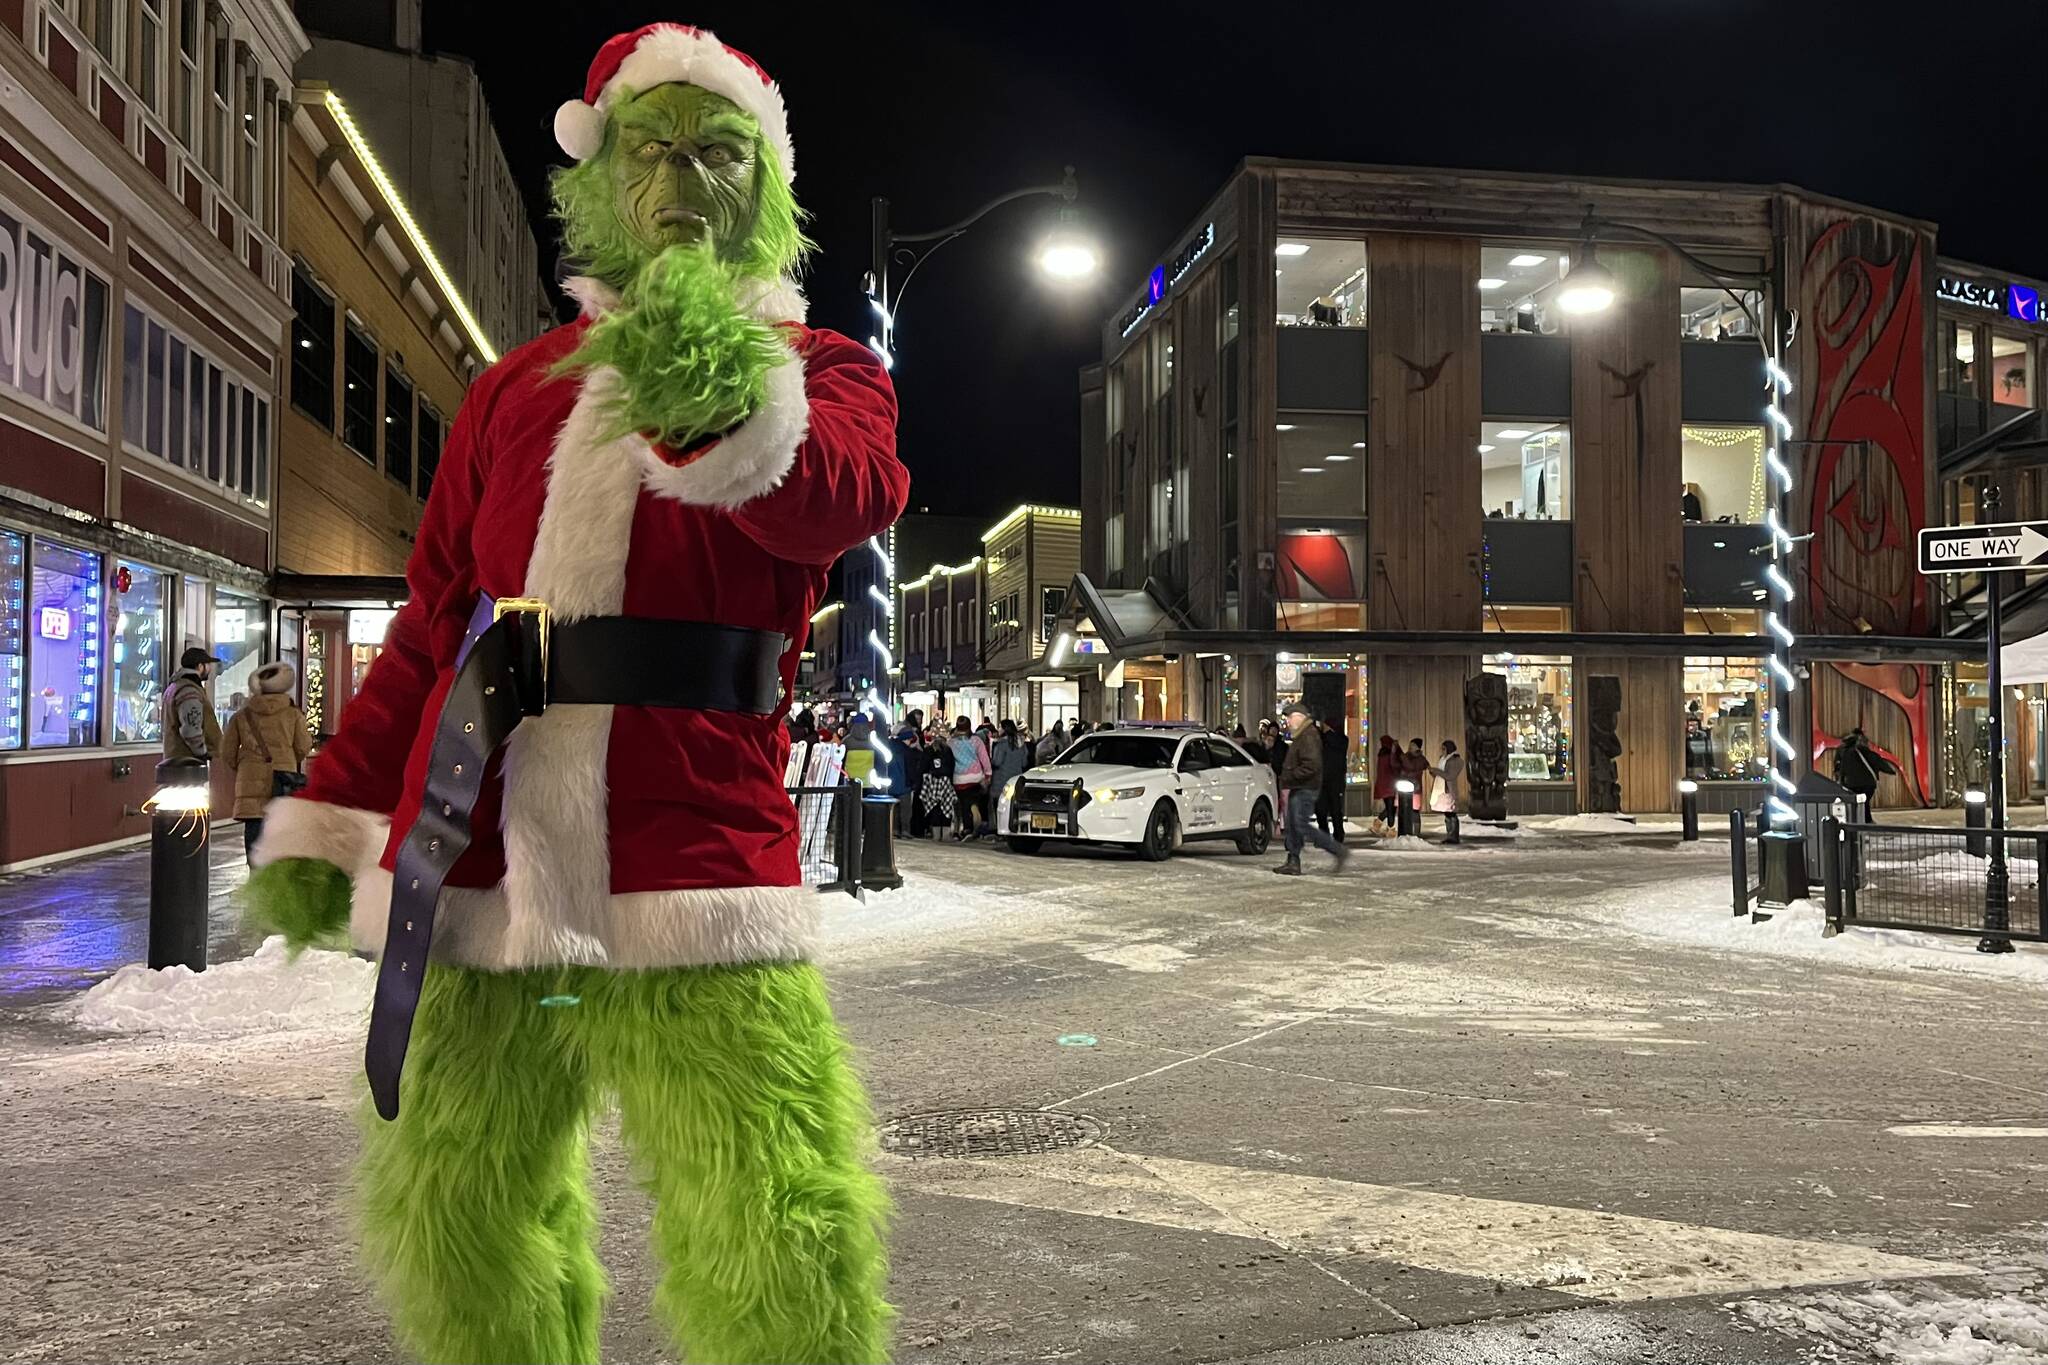 Even the Grinch got into the holiday spirit at Juneau's Gallery Walk 2022 on Friday, Dec. 2. (Jonson Kuhn / Juneau Empire)